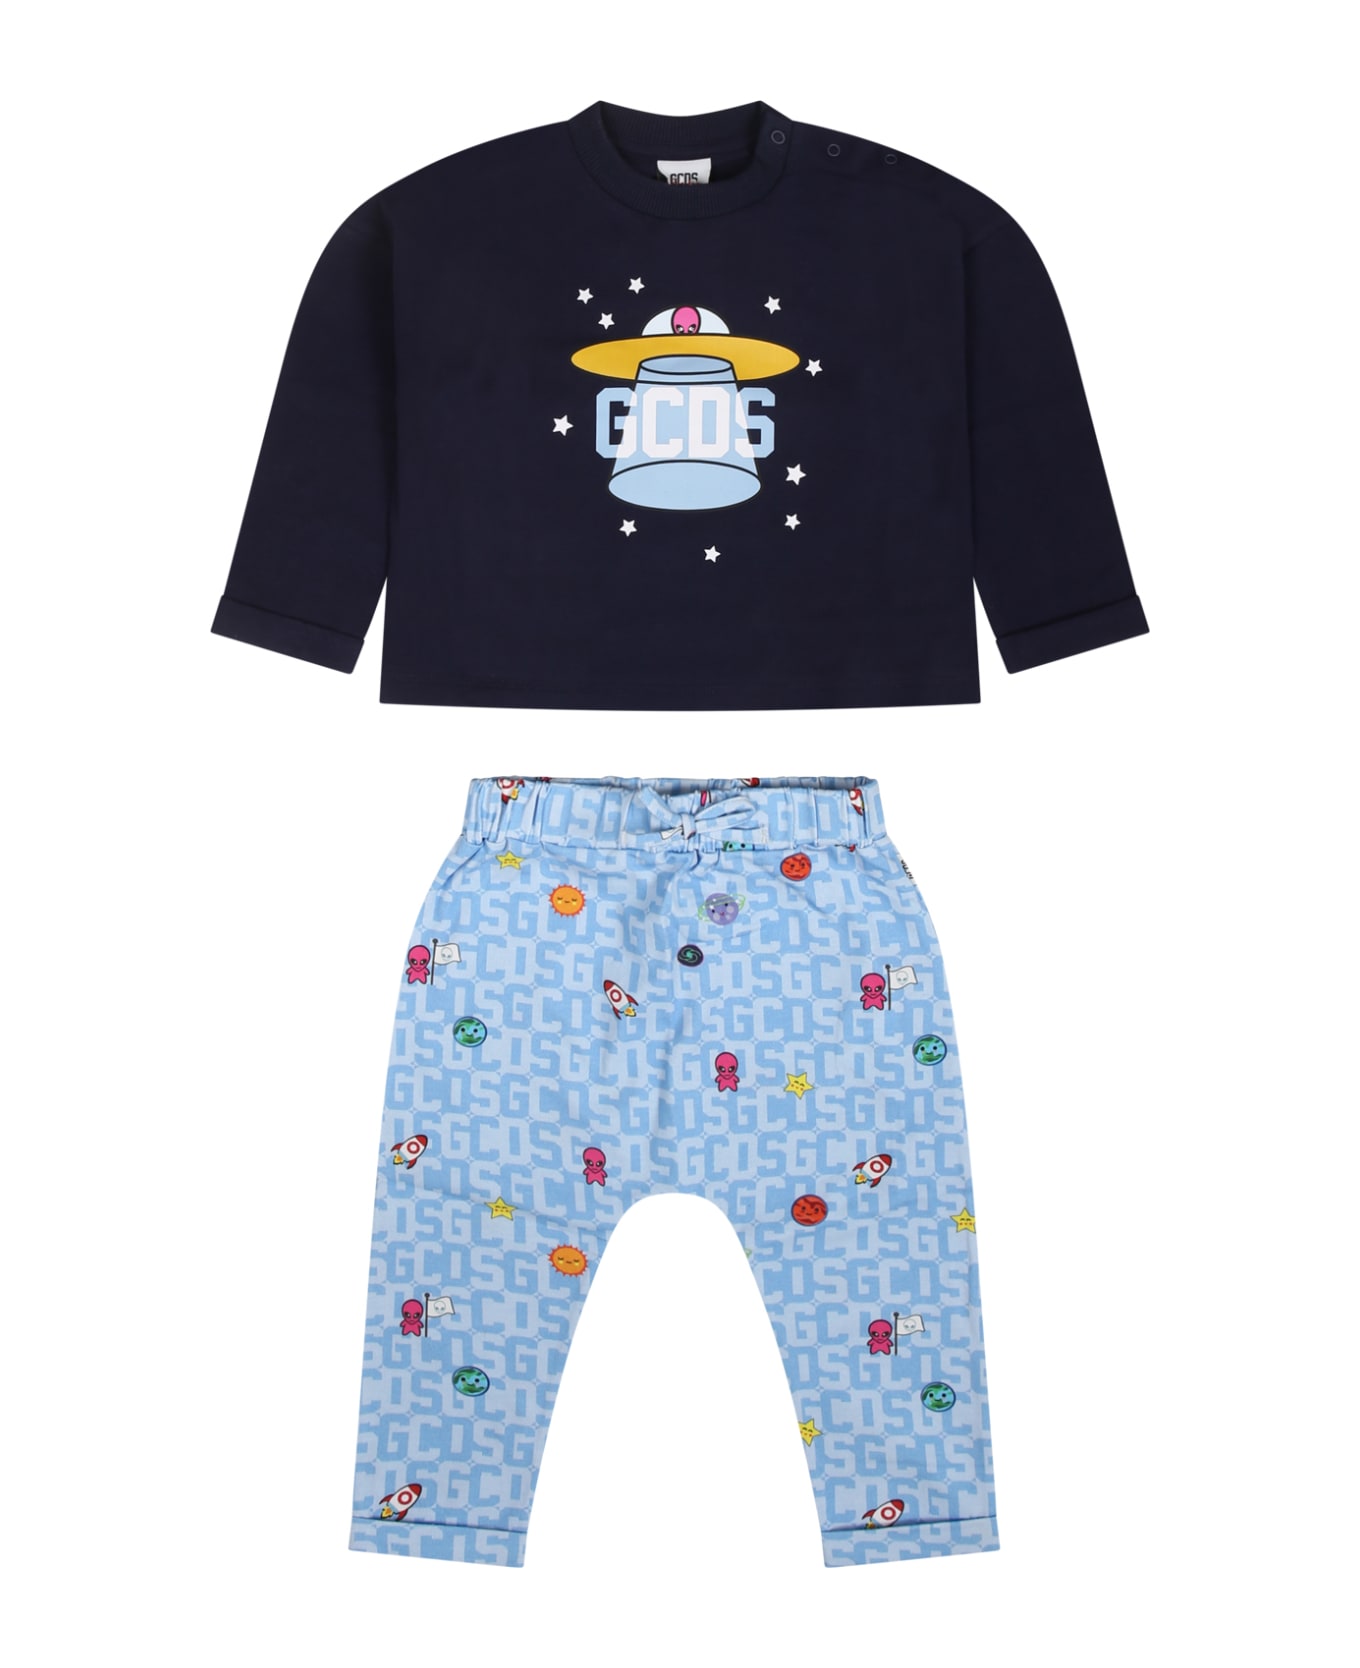 GCDS Mini Blue Pajamas For Baby Boy With Alien Print And Logo - Blue